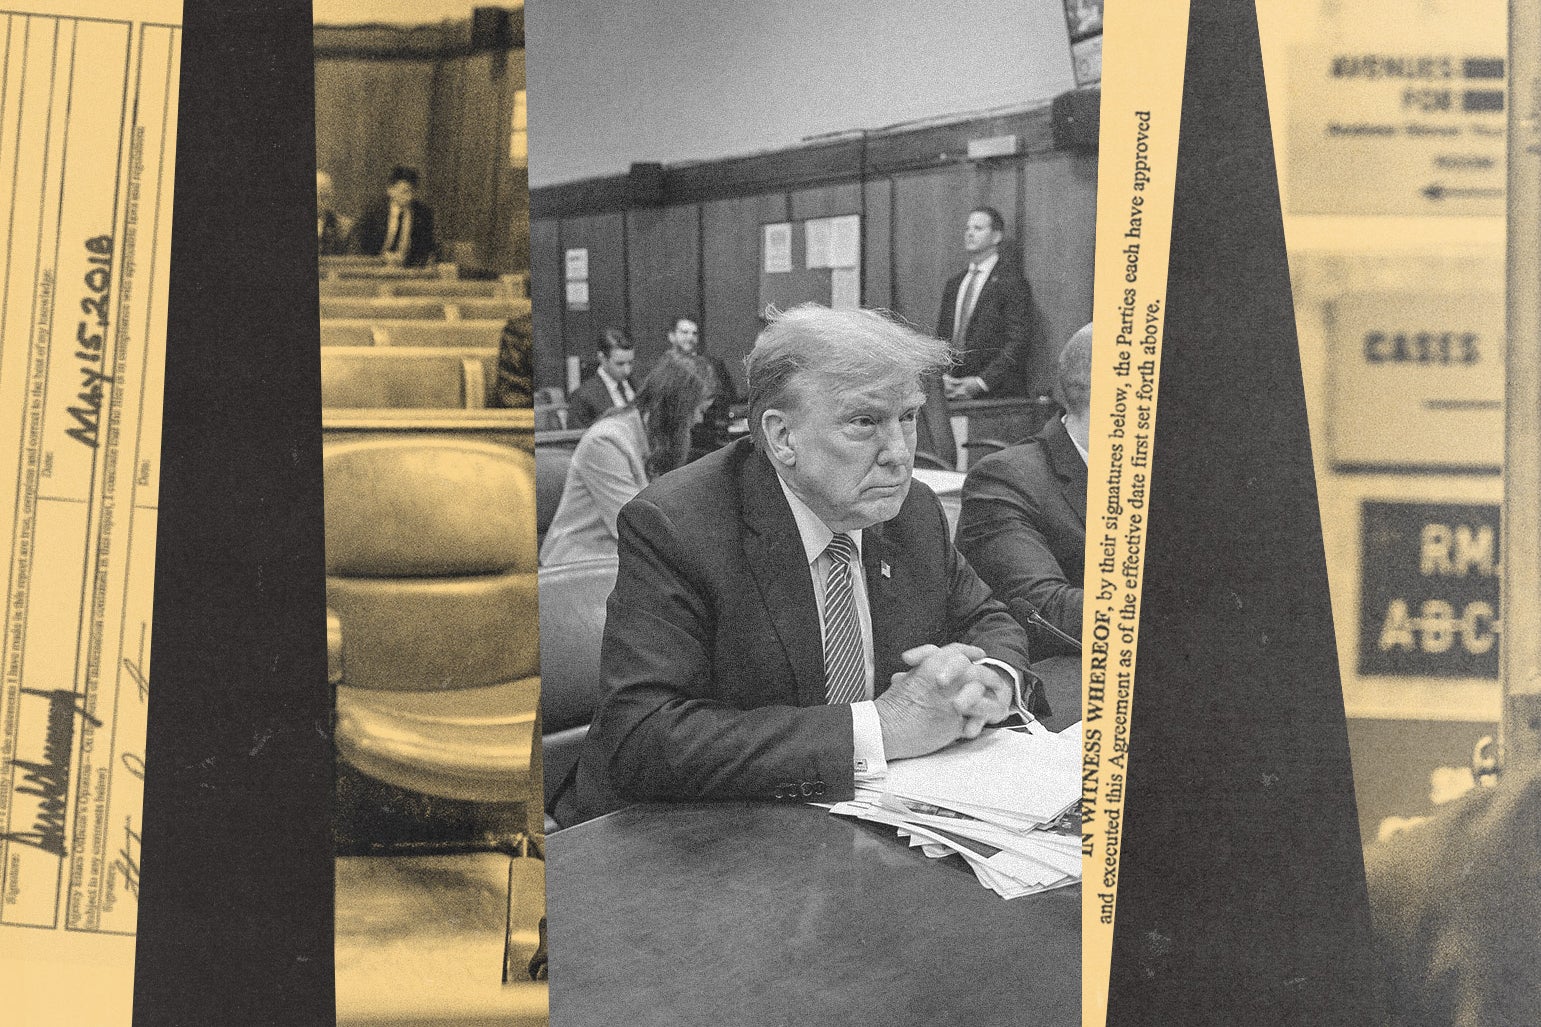 A collage of Donald Trump sitting in the courtroom, with gold-tinted documents around him.